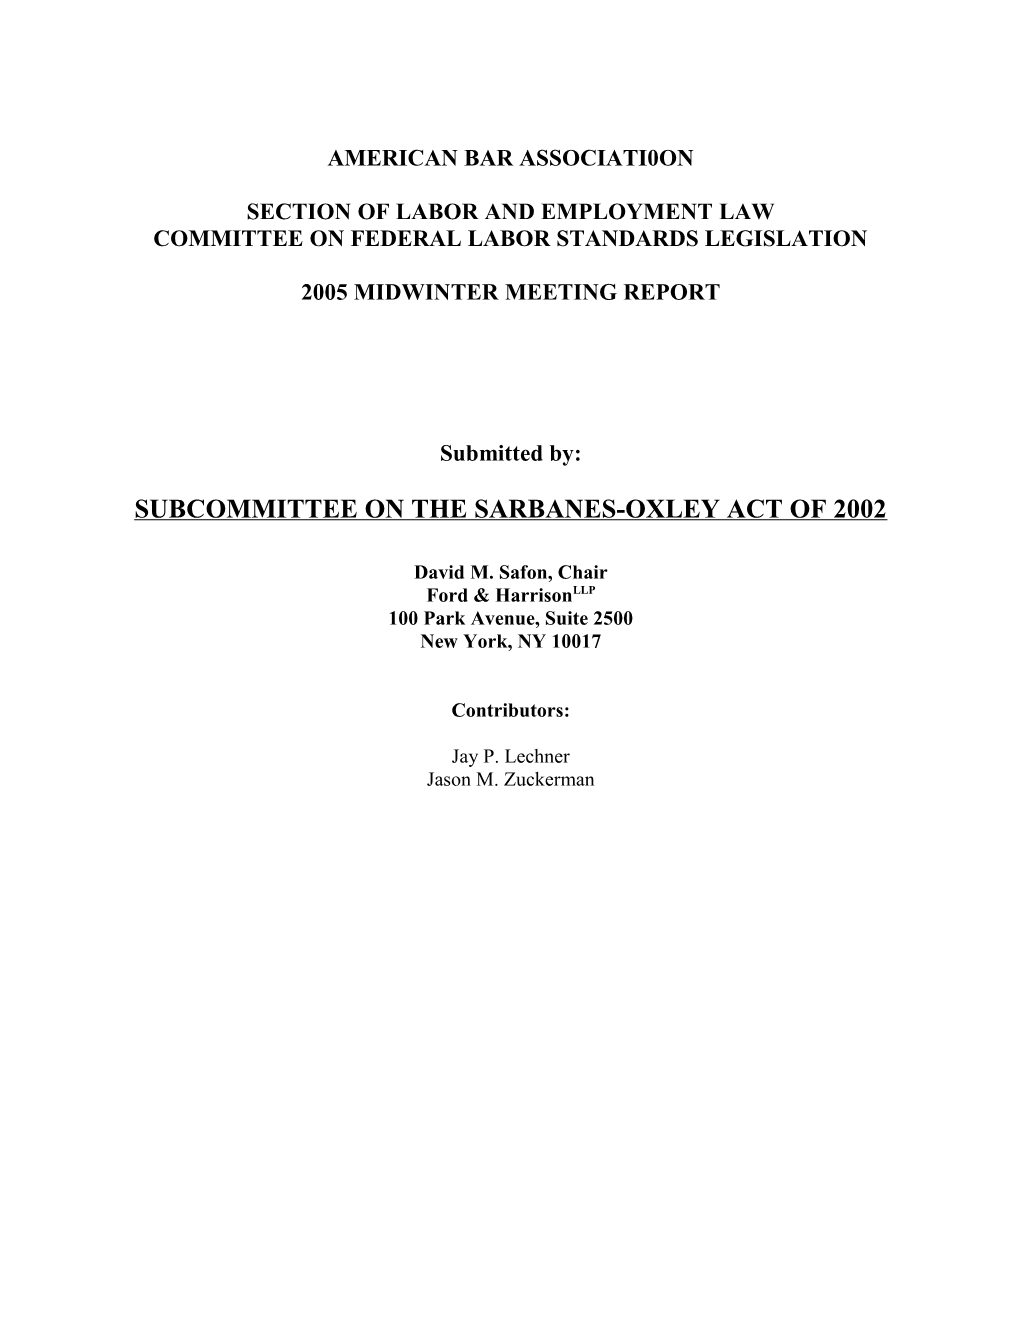 Report of Subcommittee on The